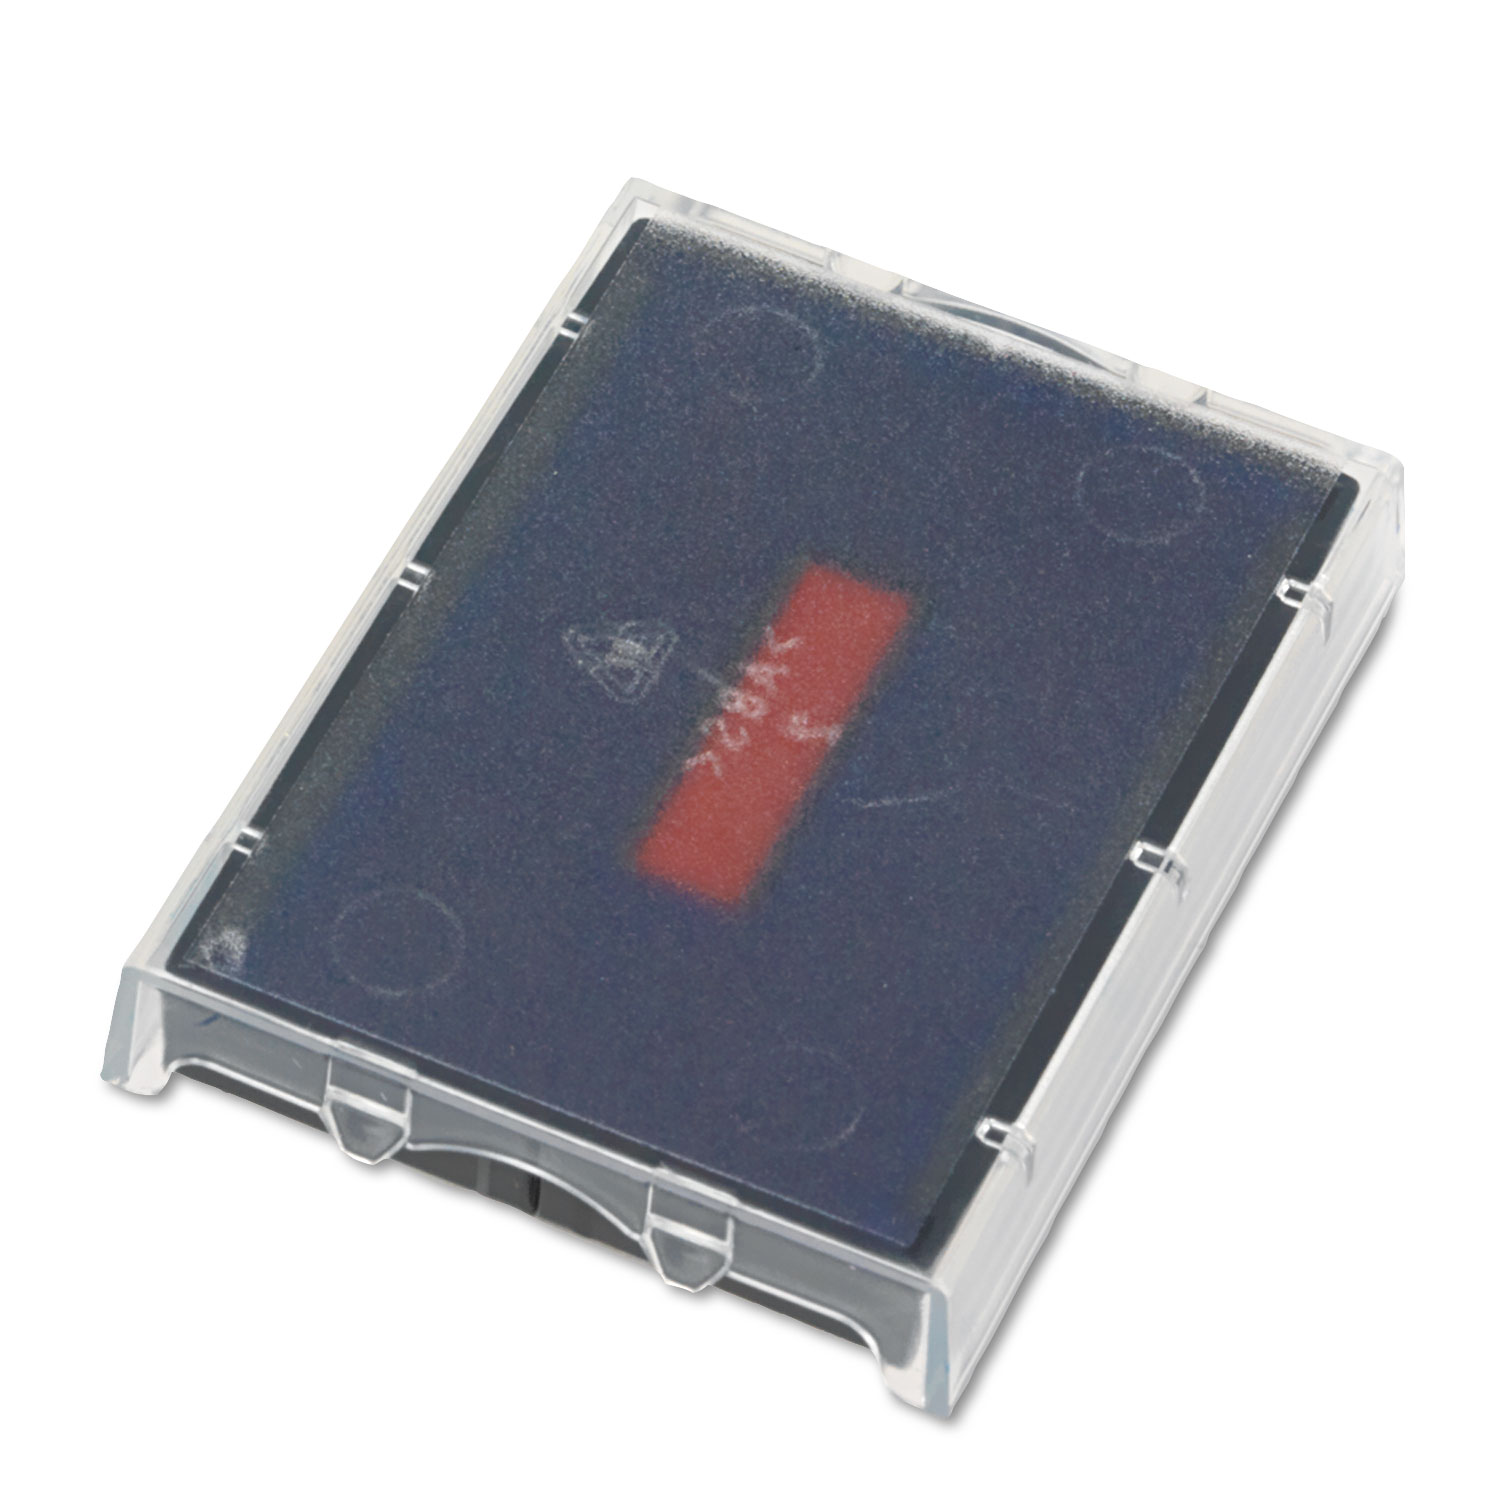  Identity Group P5470BR T5470 Dater Replacement Ink Pad, 1 5/8 x 2 1/2, Blue/Red (USSP5470BR) 